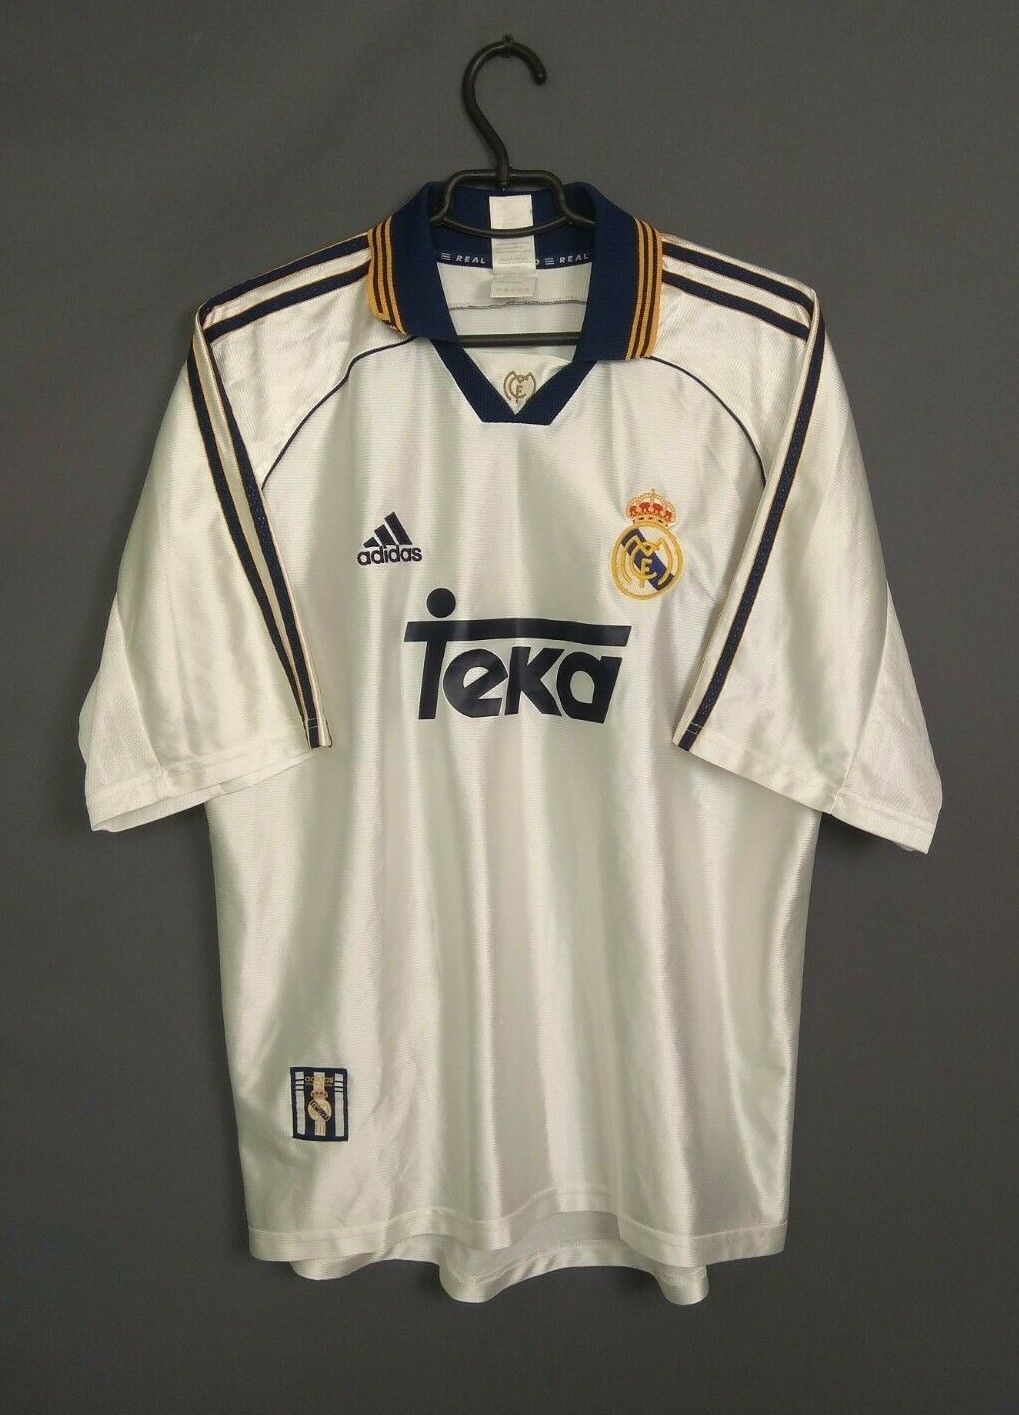 Real Madrid Jersey 1998 2000 Home LARGE Shirt Soccer Adidas ig93 100% nowy, tani